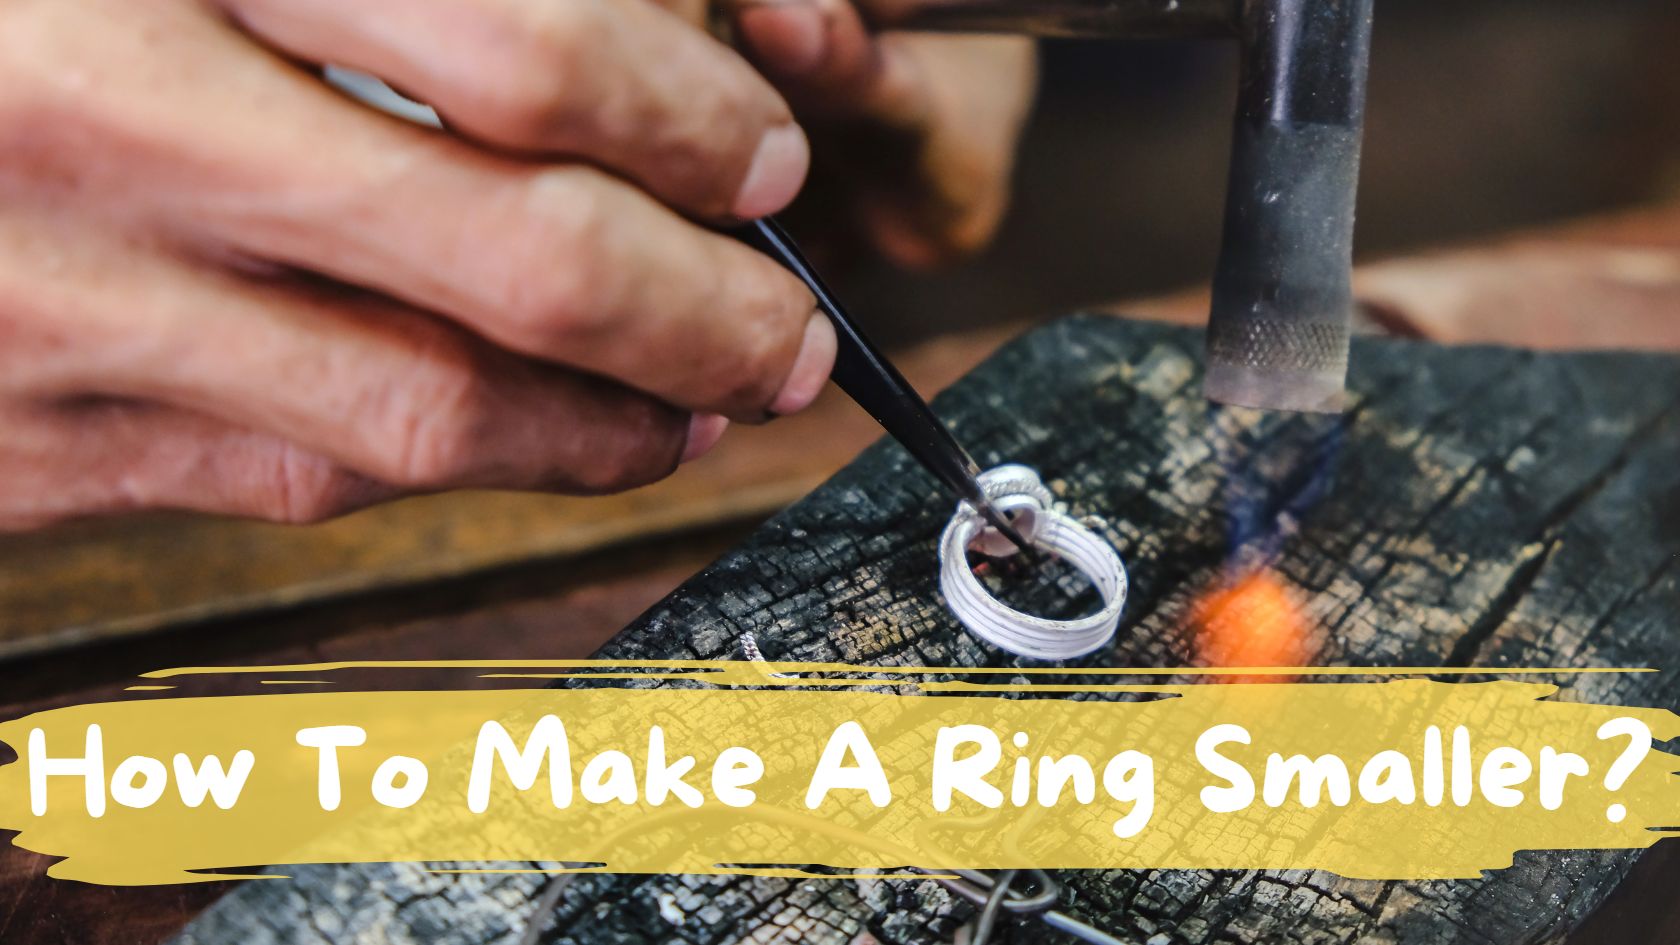 How To Make A Ring Smaller